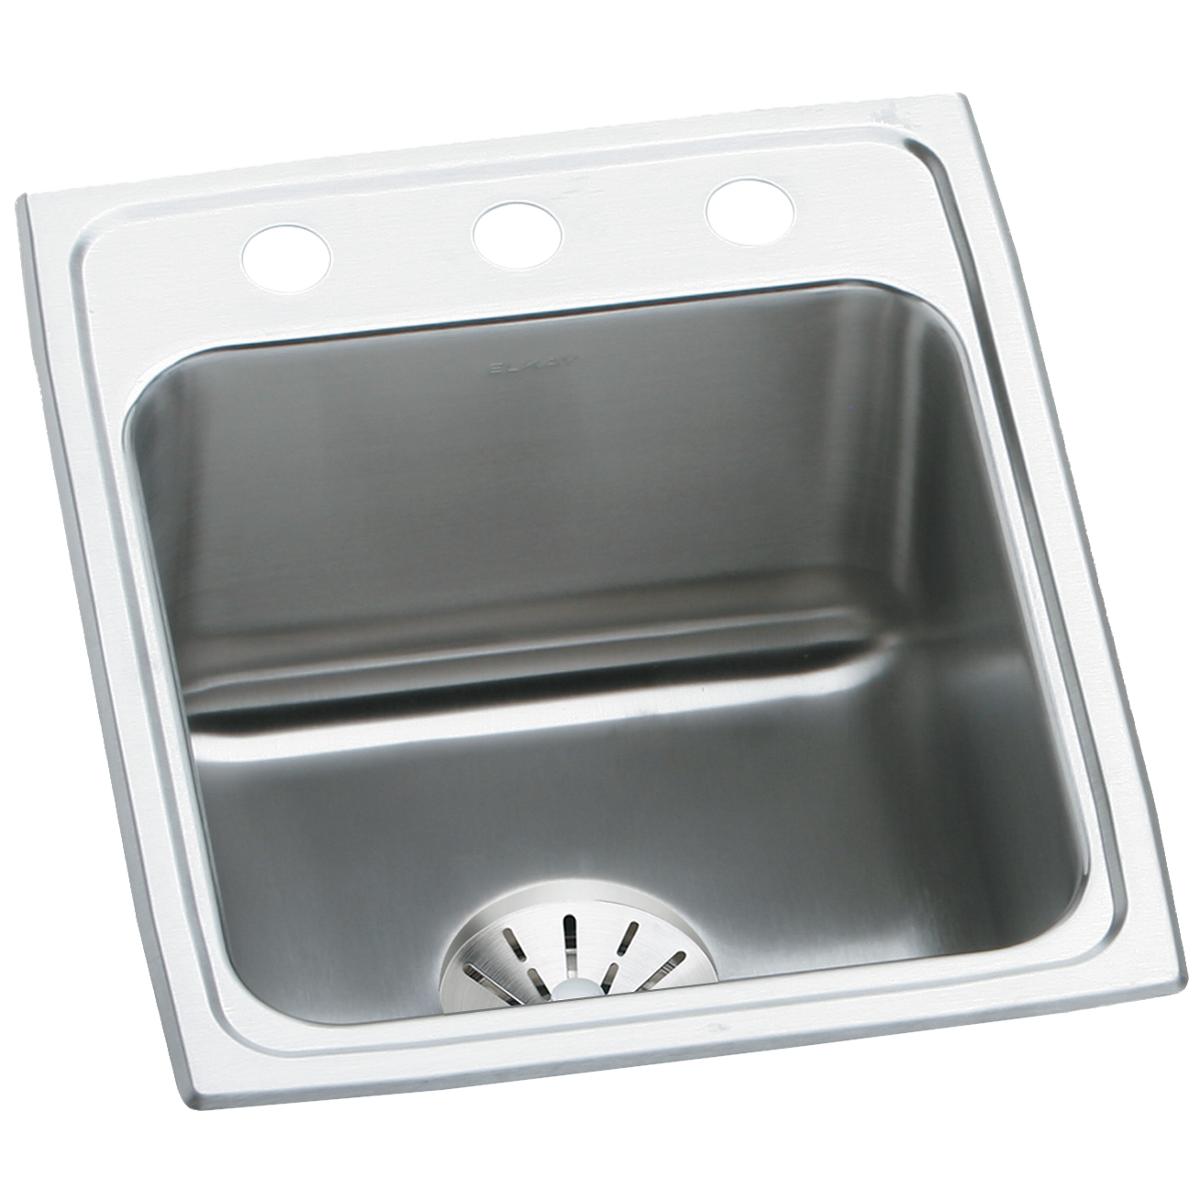 Elkay Lustertone Classic 17" x 22" x 10-1/8" Single Bowl Stainless Steel Drop-in Sink with Perfect Drain